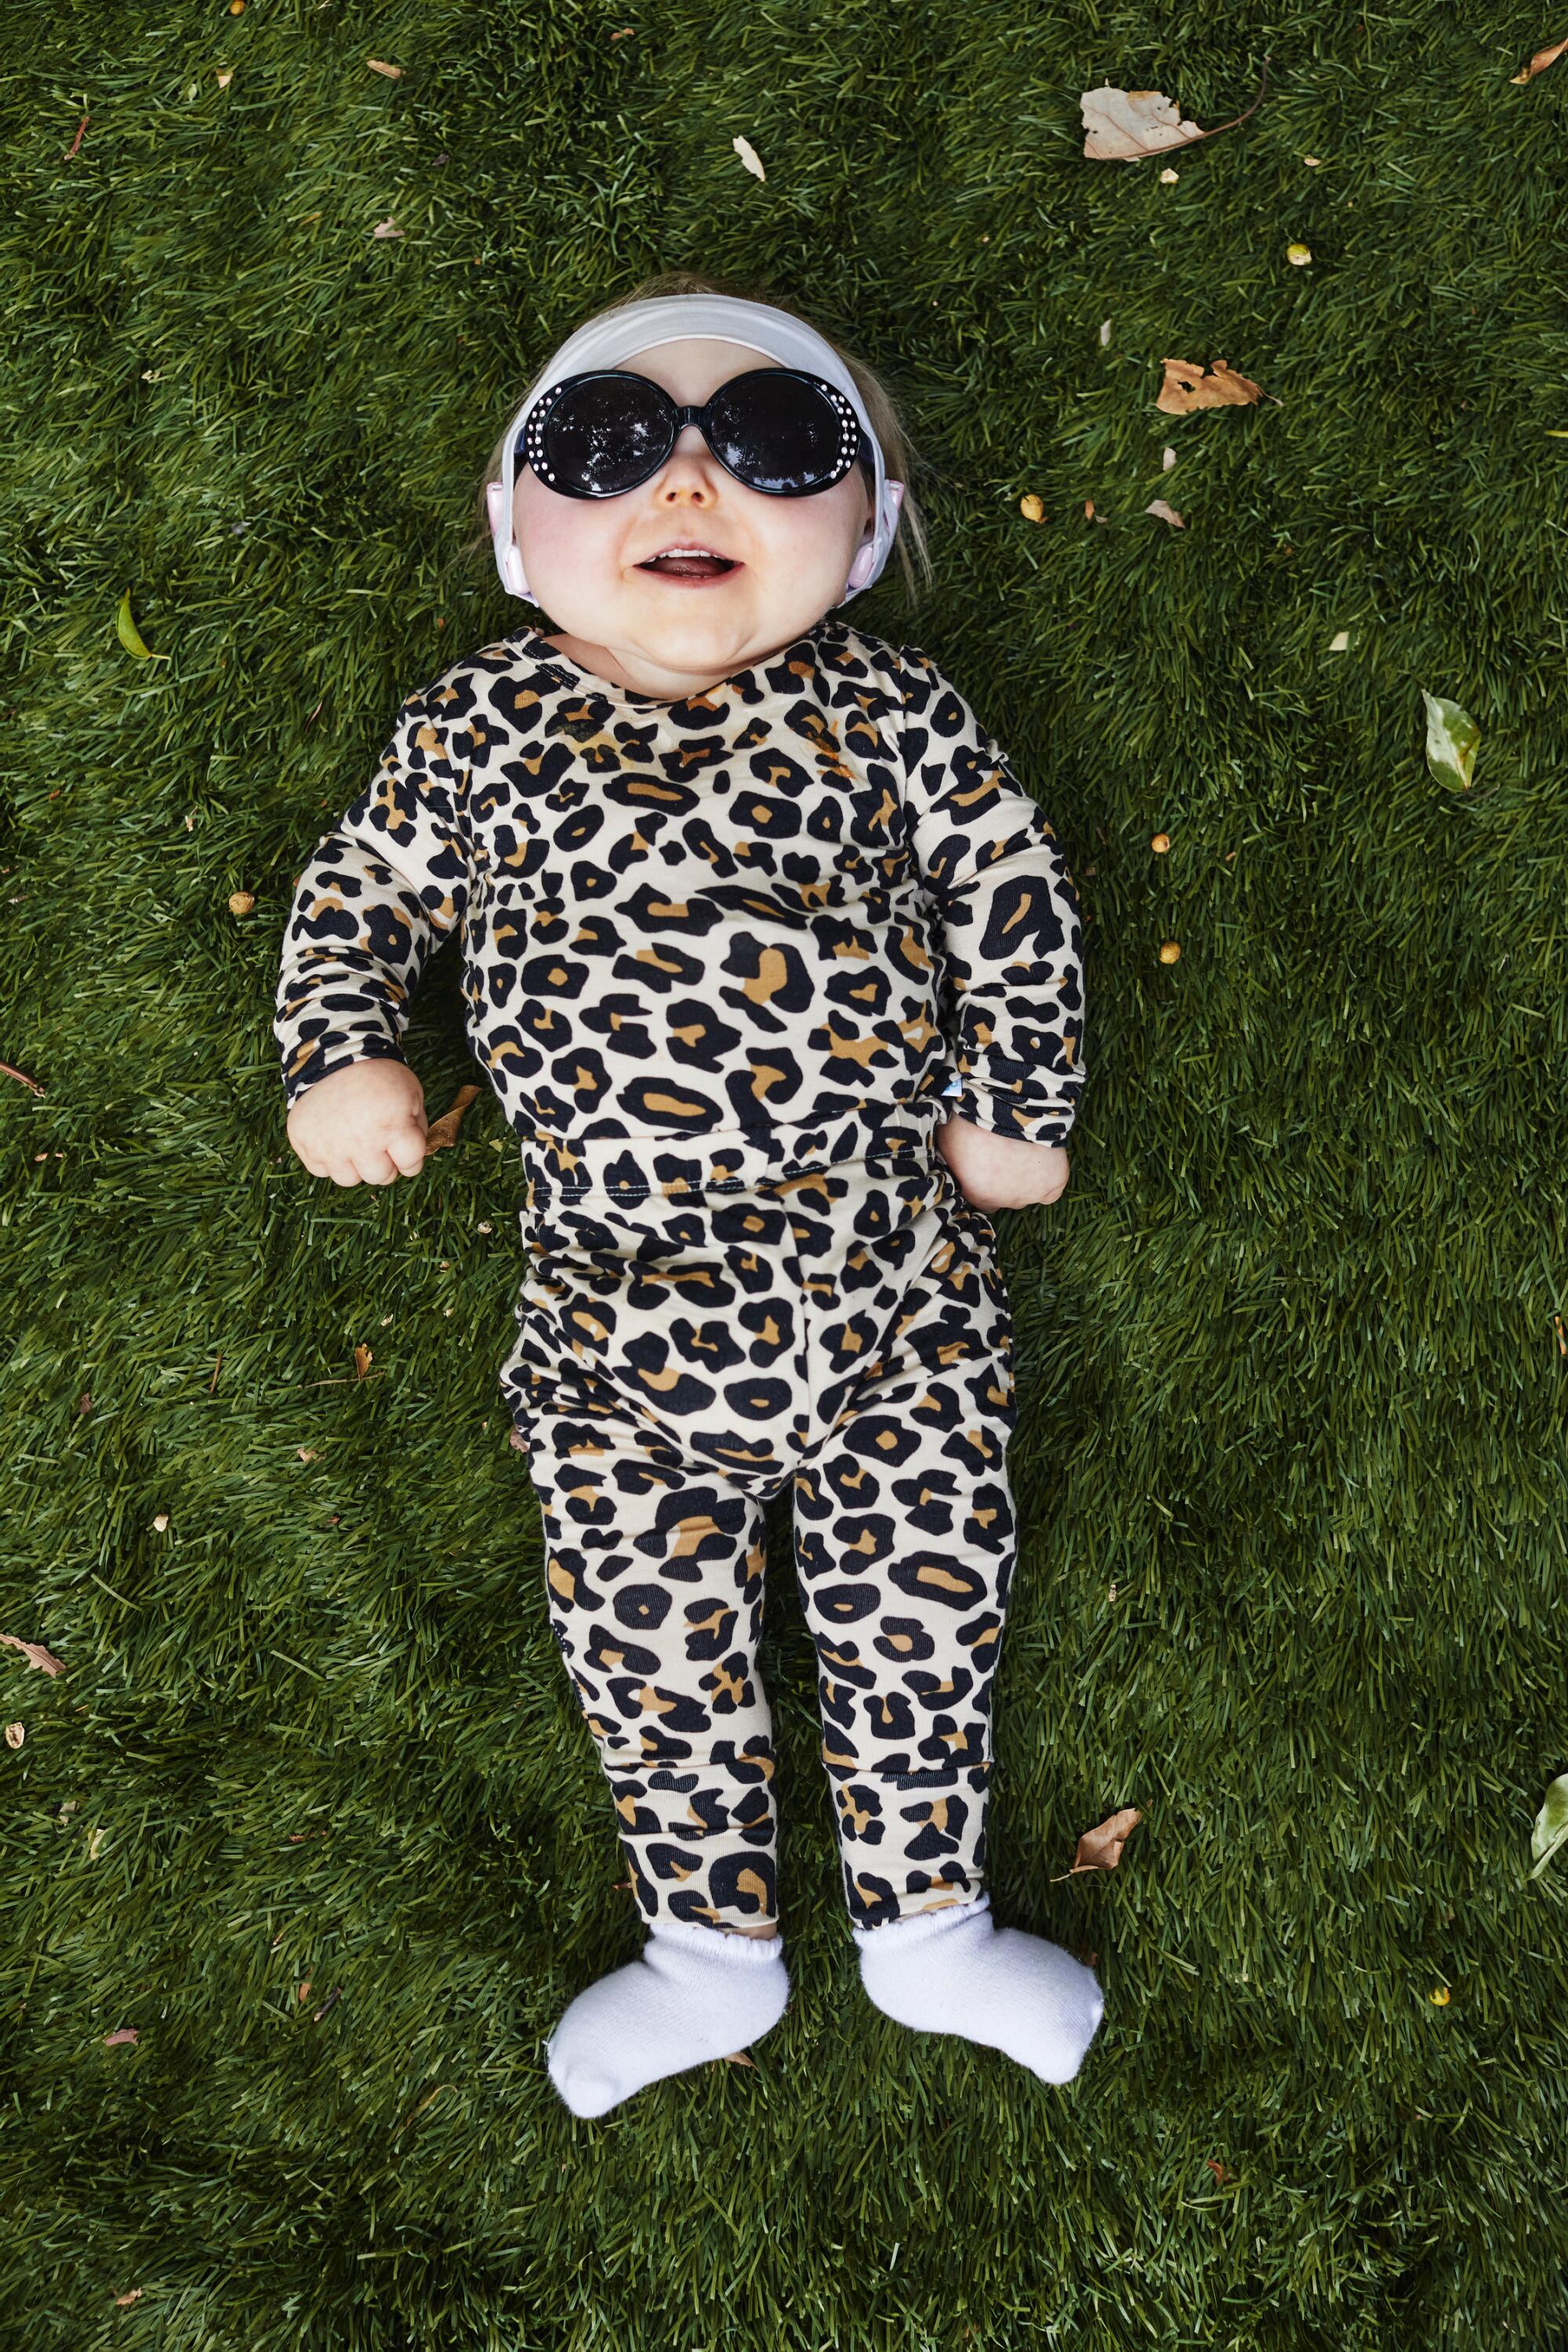 A baby wearing sunglasses and a leopard-print onesie lies on her back on a lawn.